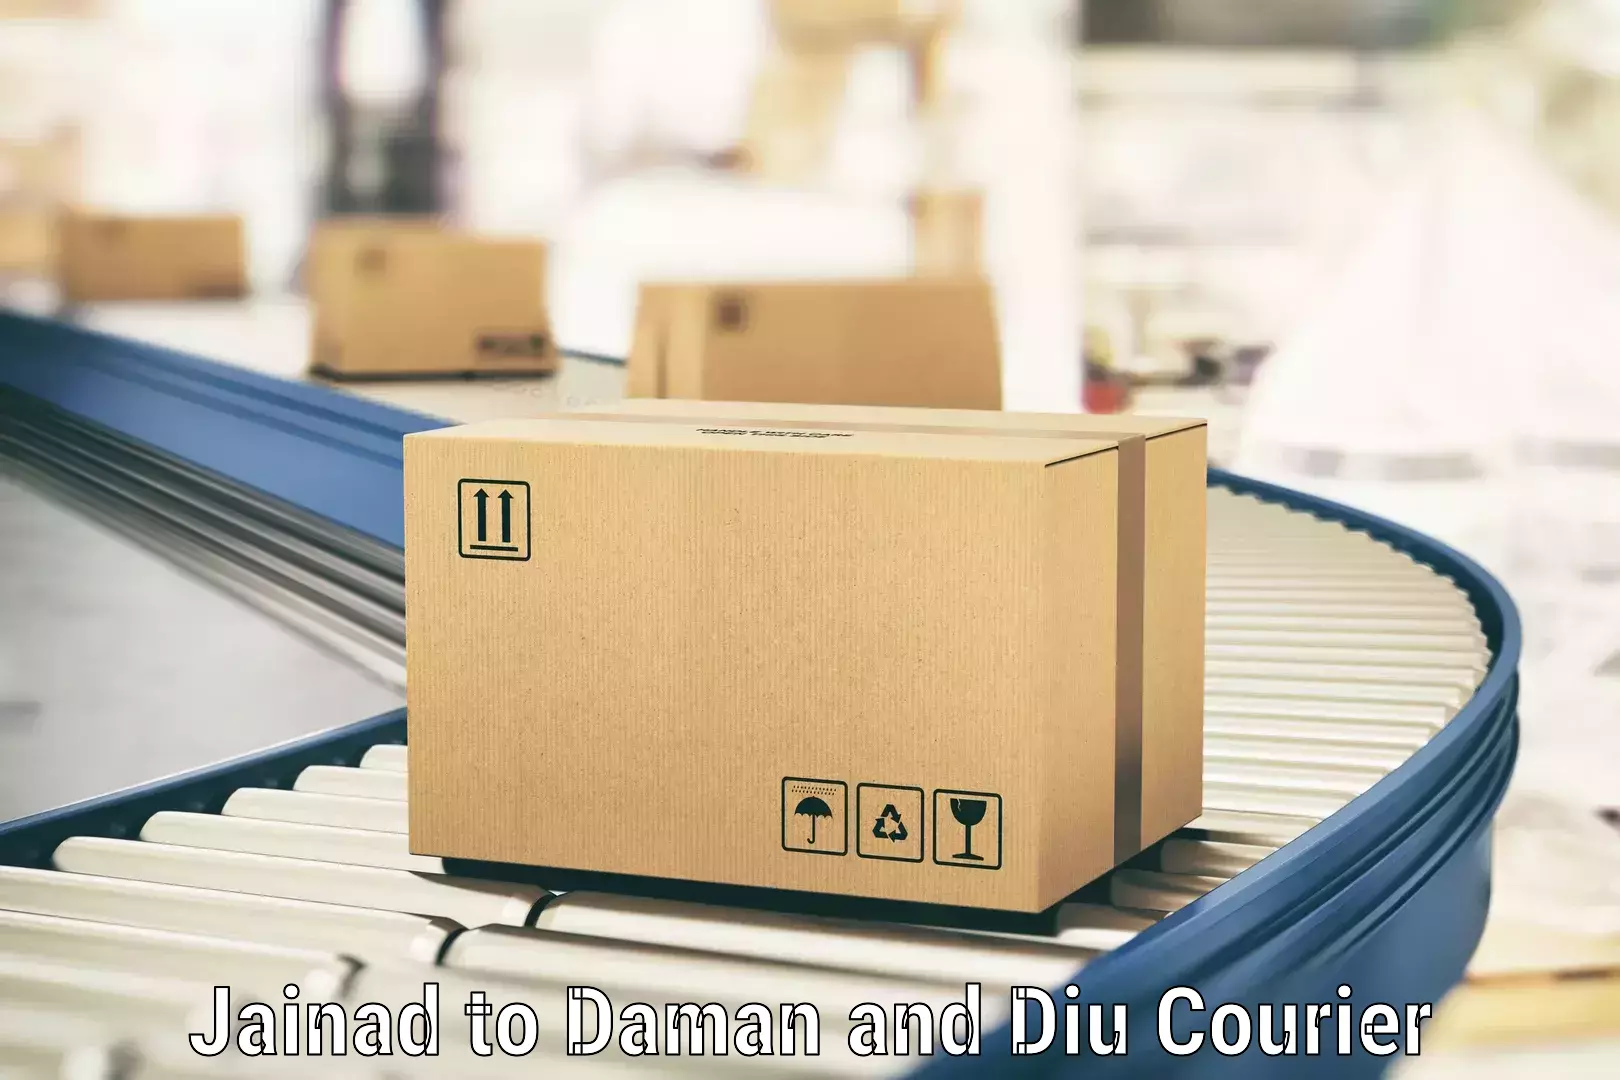 Multi-national courier services Jainad to Diu